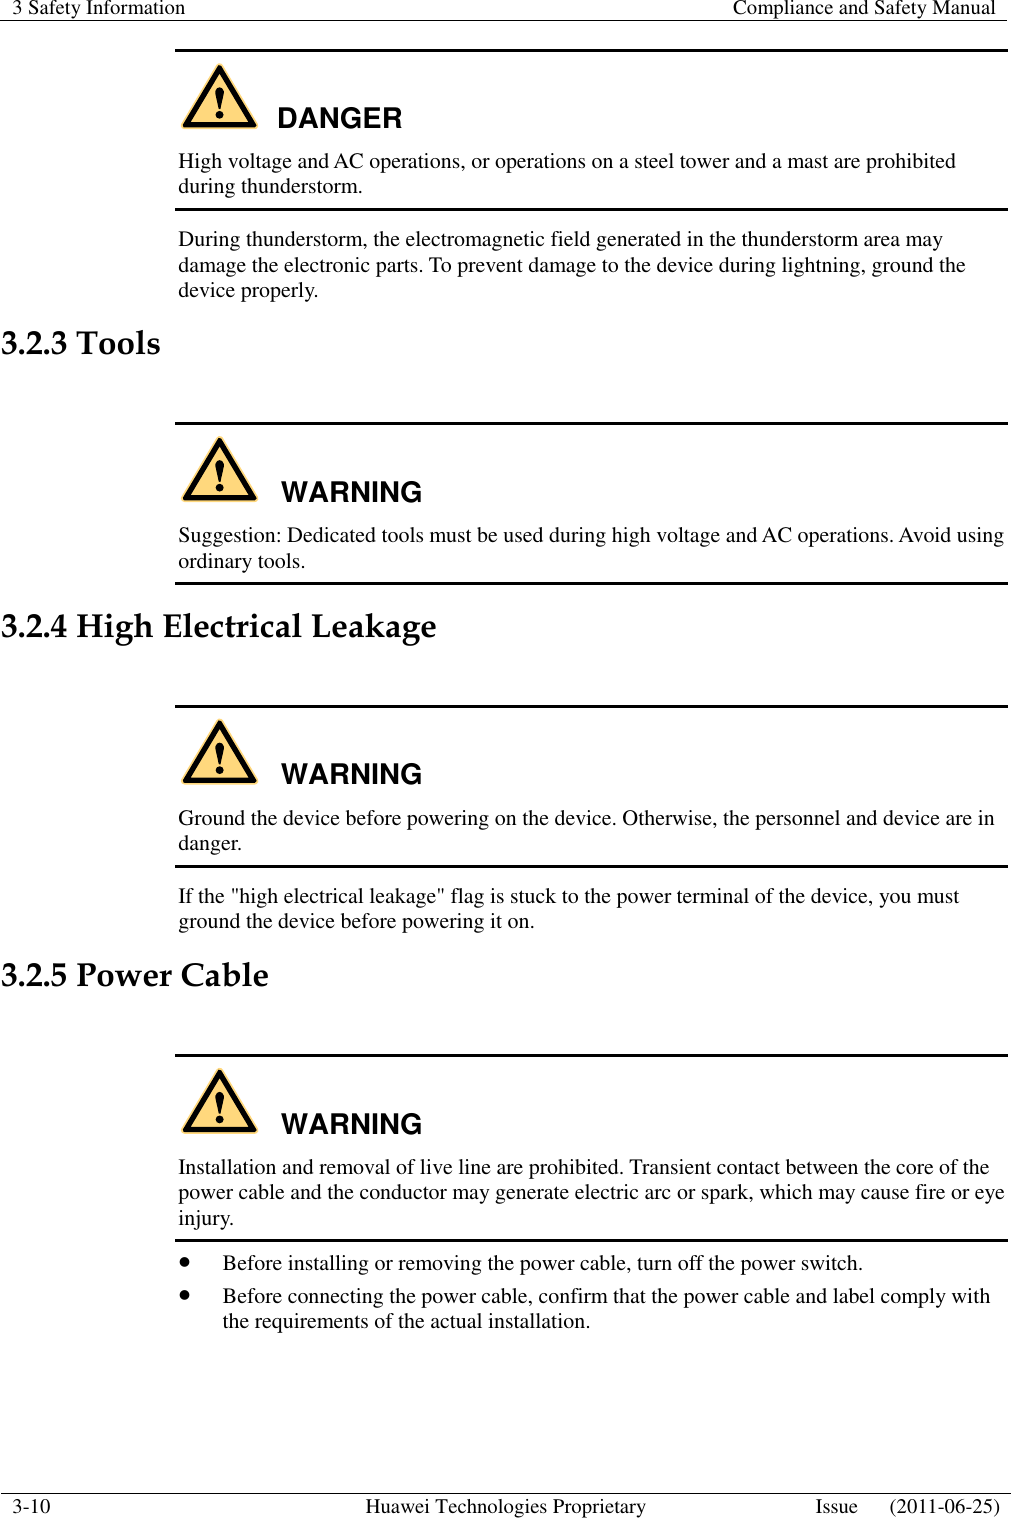 3 Safety Information    Compliance and Safety Manual  3-10 Huawei Technologies Proprietary Issue      (2011-06-25)  DANGER High voltage and AC operations, or operations on a steel tower and a mast are prohibited during thunderstorm. During thunderstorm, the electromagnetic field generated in the thunderstorm area may damage the electronic parts. To prevent damage to the device during lightning, ground the device properly. 3.2.3 Tools  WARNING Suggestion: Dedicated tools must be used during high voltage and AC operations. Avoid using ordinary tools. 3.2.4 High Electrical Leakage  WARNING Ground the device before powering on the device. Otherwise, the personnel and device are in danger. If the &quot;high electrical leakage&quot; flag is stuck to the power terminal of the device, you must ground the device before powering it on. 3.2.5 Power Cable  WARNING Installation and removal of live line are prohibited. Transient contact between the core of the power cable and the conductor may generate electric arc or spark, which may cause fire or eye injury.  Before installing or removing the power cable, turn off the power switch.  Before connecting the power cable, confirm that the power cable and label comply with the requirements of the actual installation.  